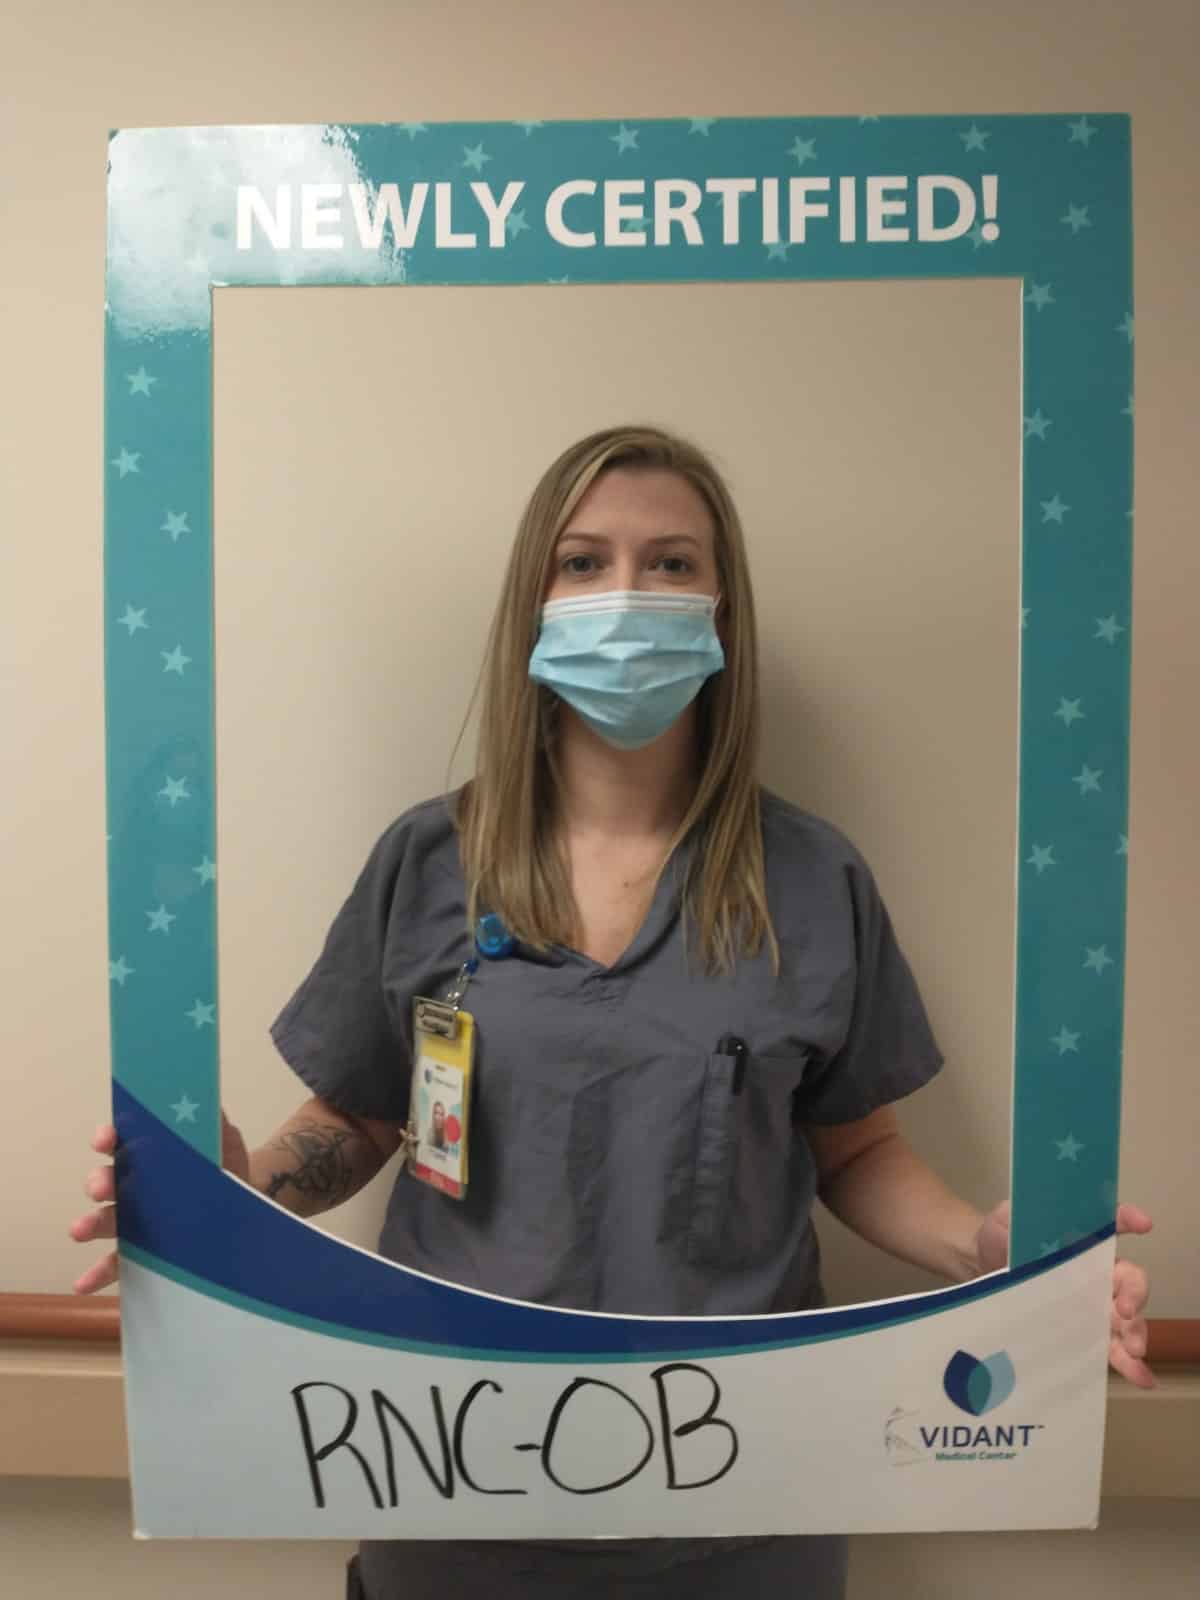 Tonya Cecci, RN, RNC-OB works on Labor and Delivery and received her registered nurse certification in inpatient obstetric nursing